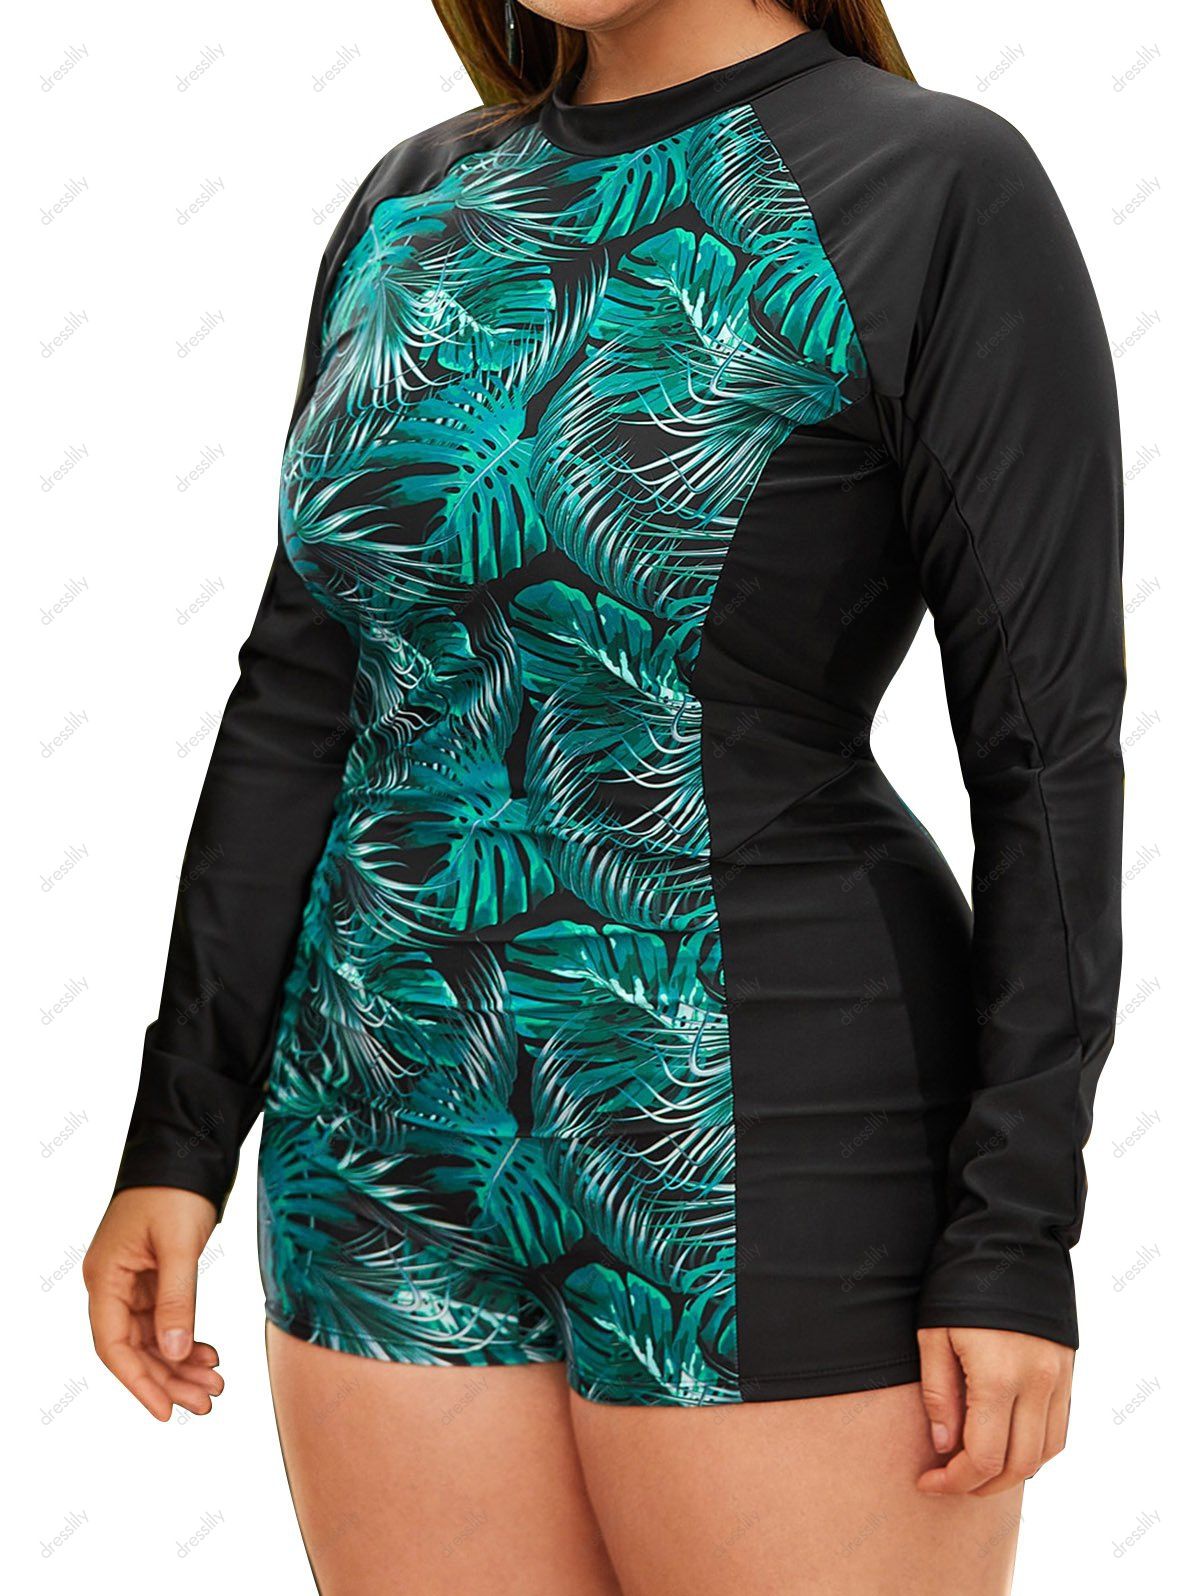 Plus Size Tropical Leaf Print Vacation One-piece Swimsuit Padded Zipper Long Sleeve Modest Swimwear - multicolor 2XL